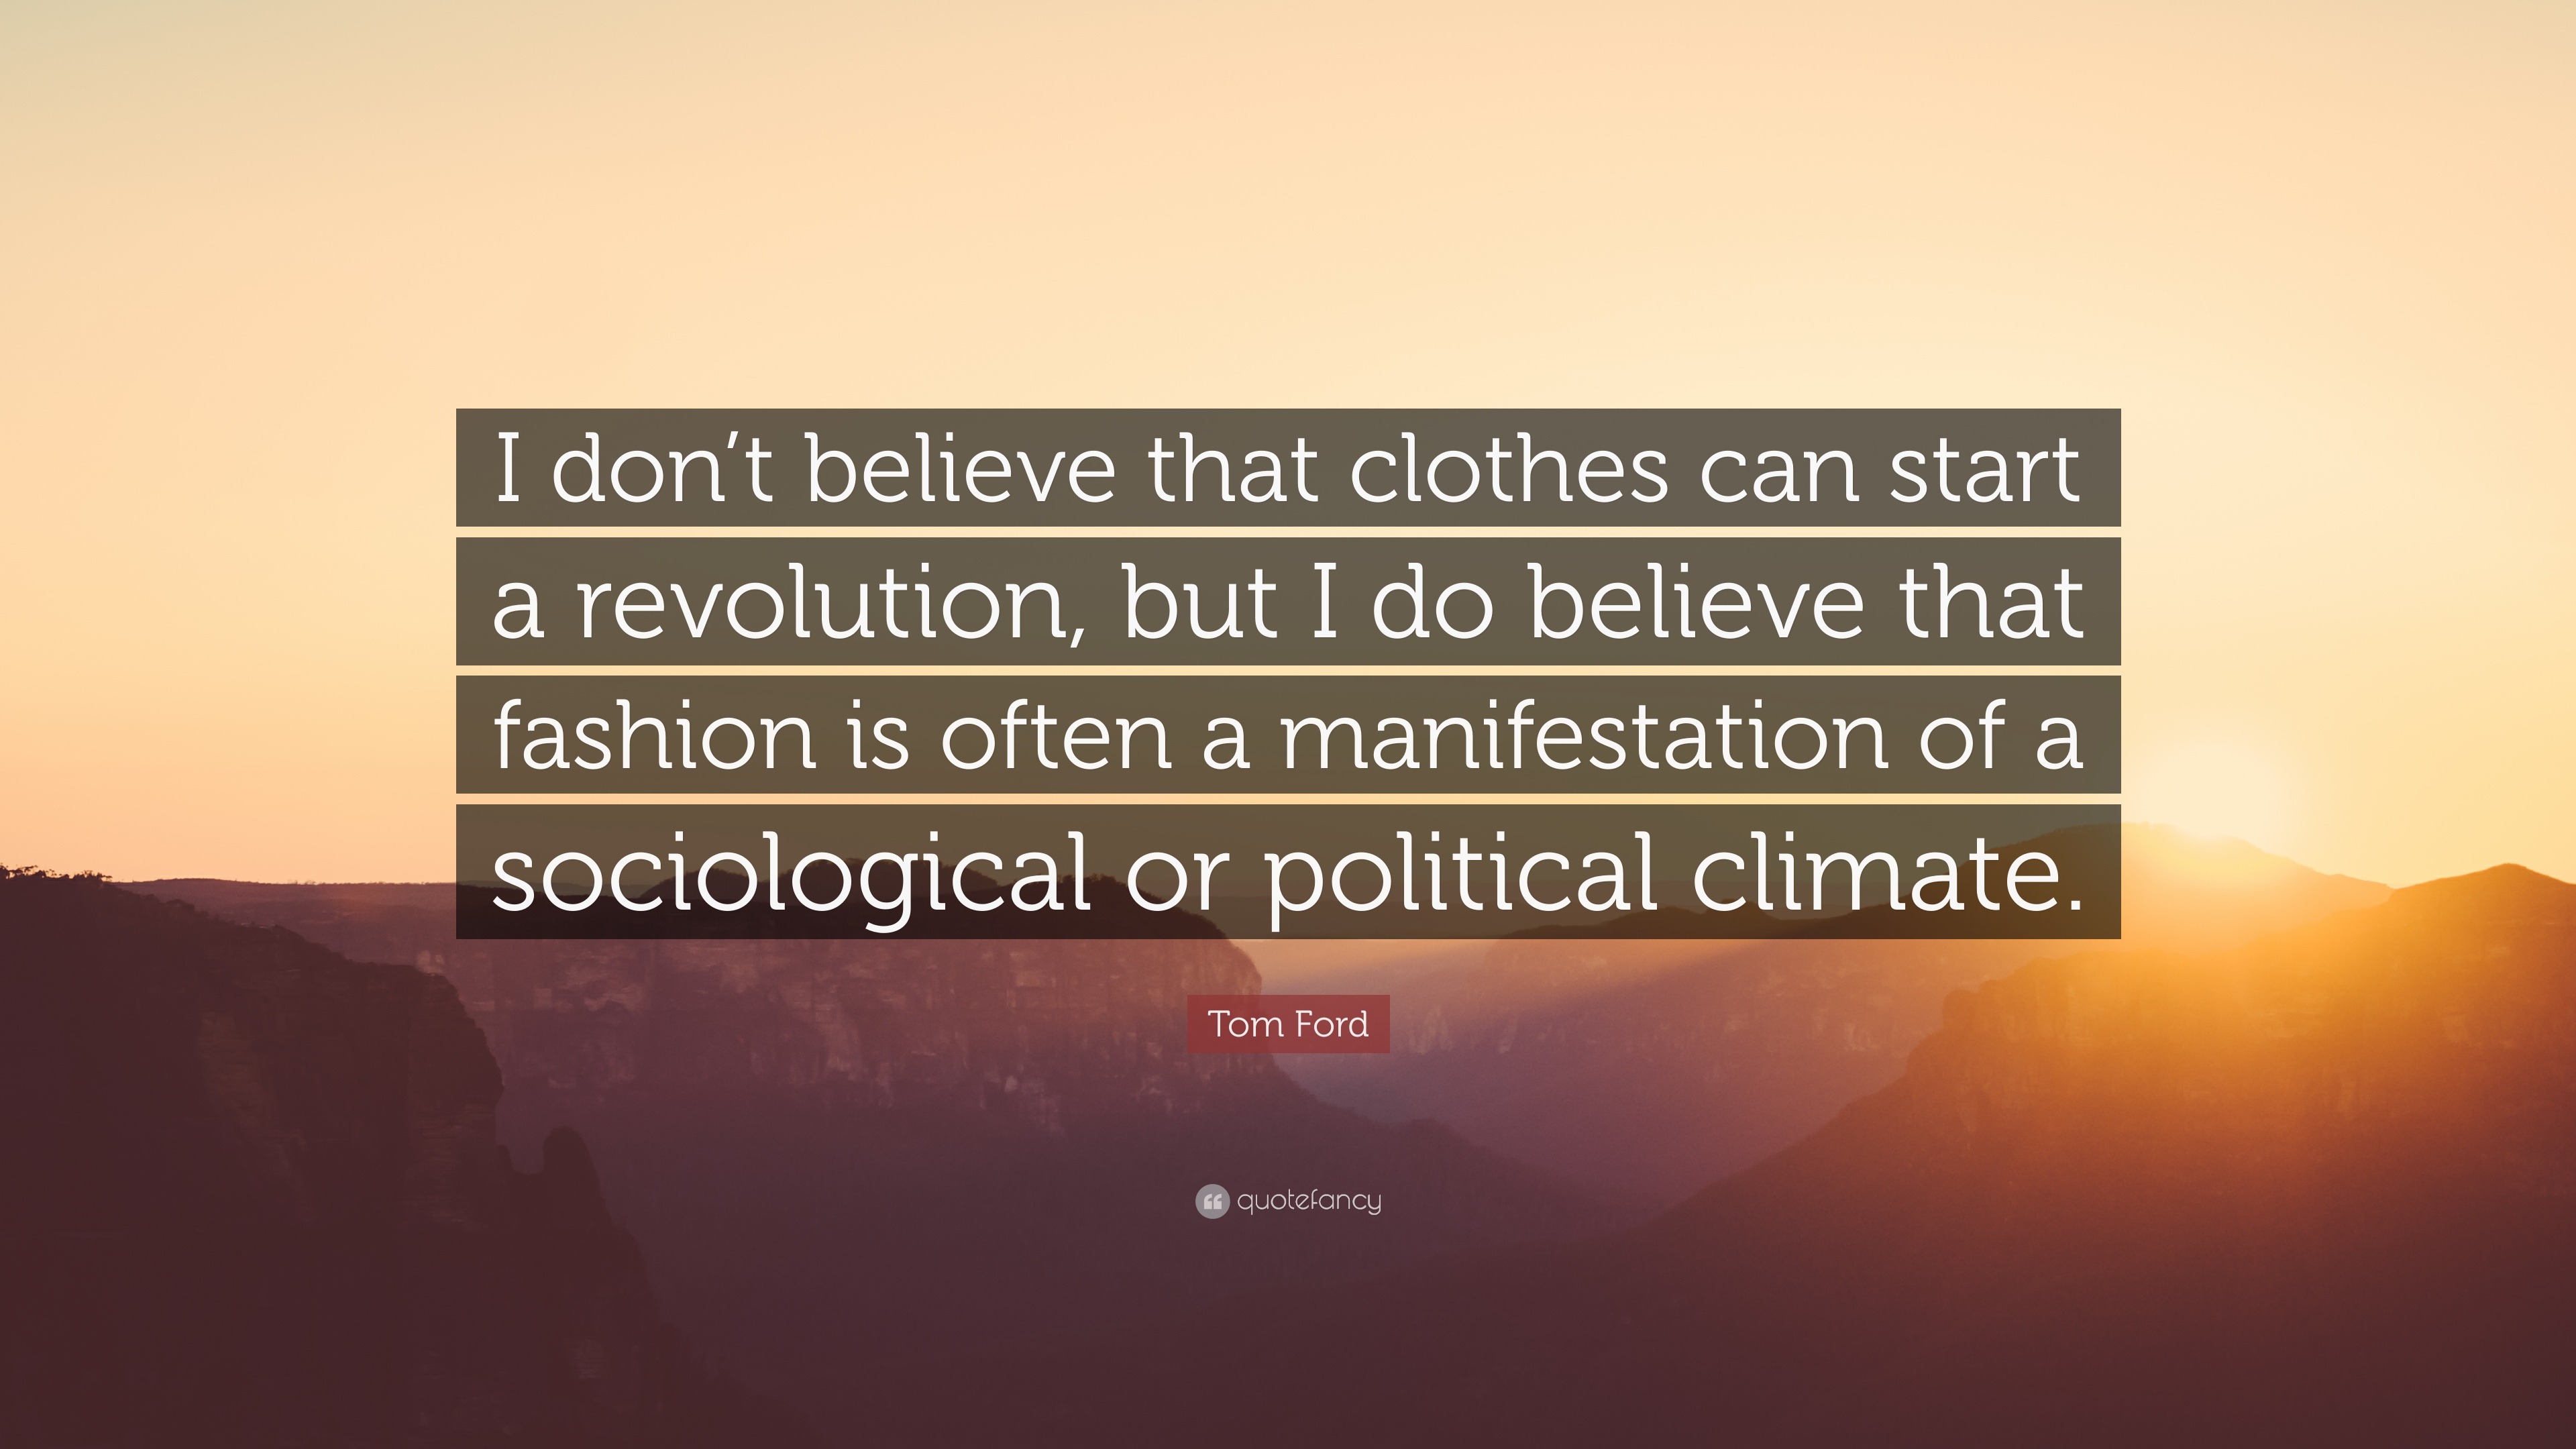 Tom Ford Quote: “I don't believe that clothes can start a revolution, but I  do believe that fashion is often a manifestation of a sociolo...”